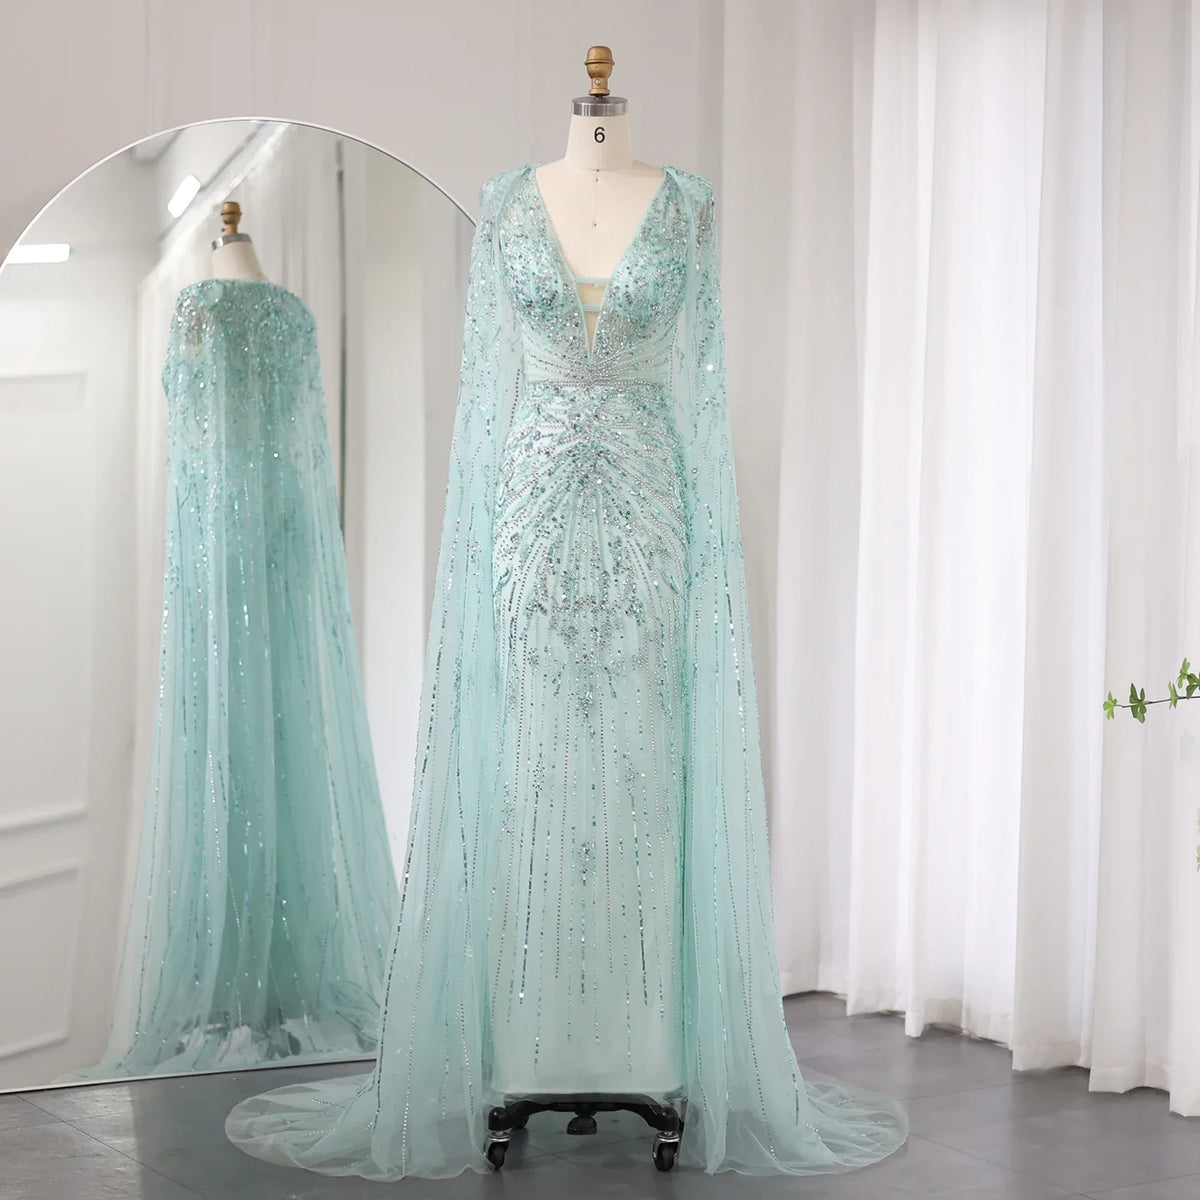 Sharon Said Luxury Dubai Turquoise Mermaid Evening Dresses with Cape V-Neck Arabic Silver Grey Wedding Formal Party Gowns SS397